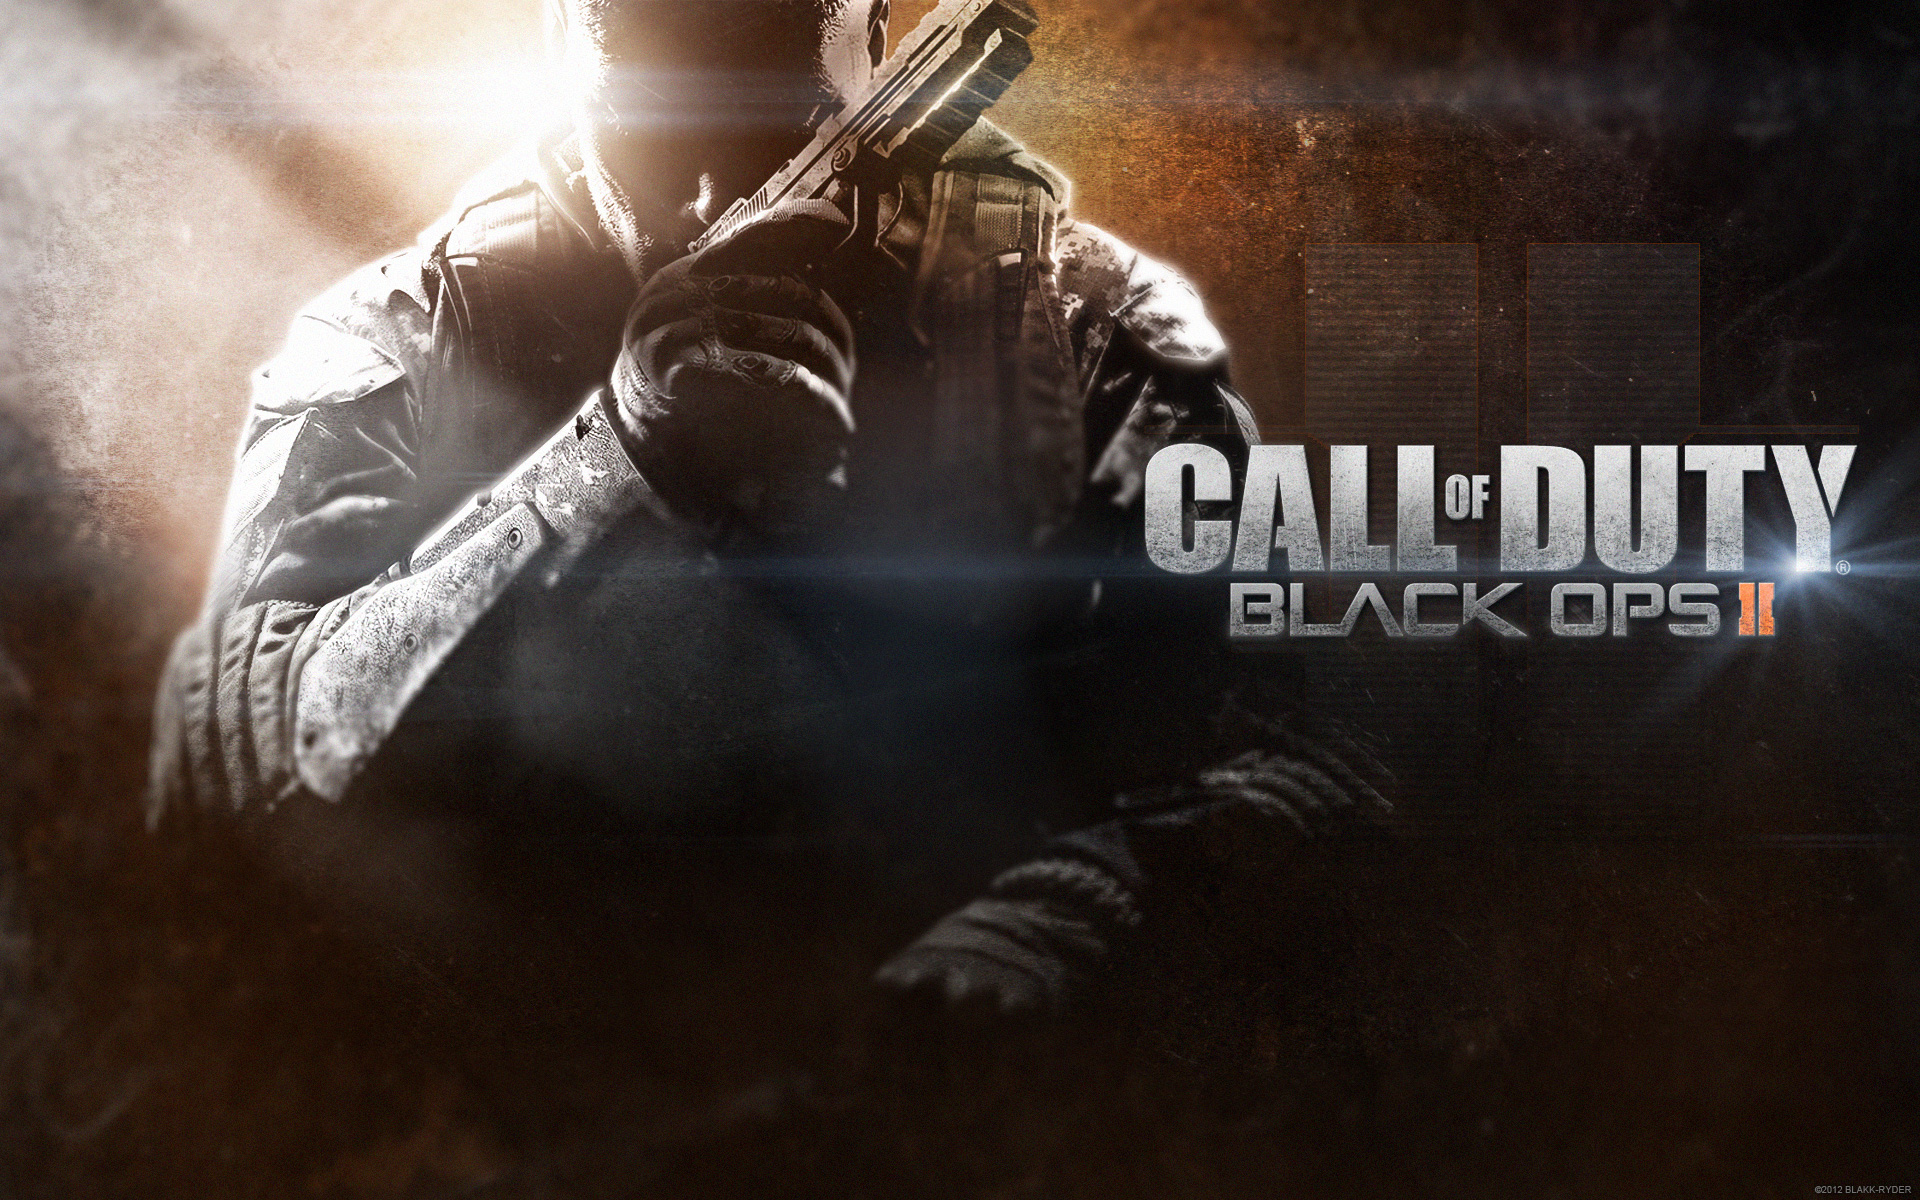 New Game In 2013 Call of Duty Black Ops 2 HD Wallpaper Picture